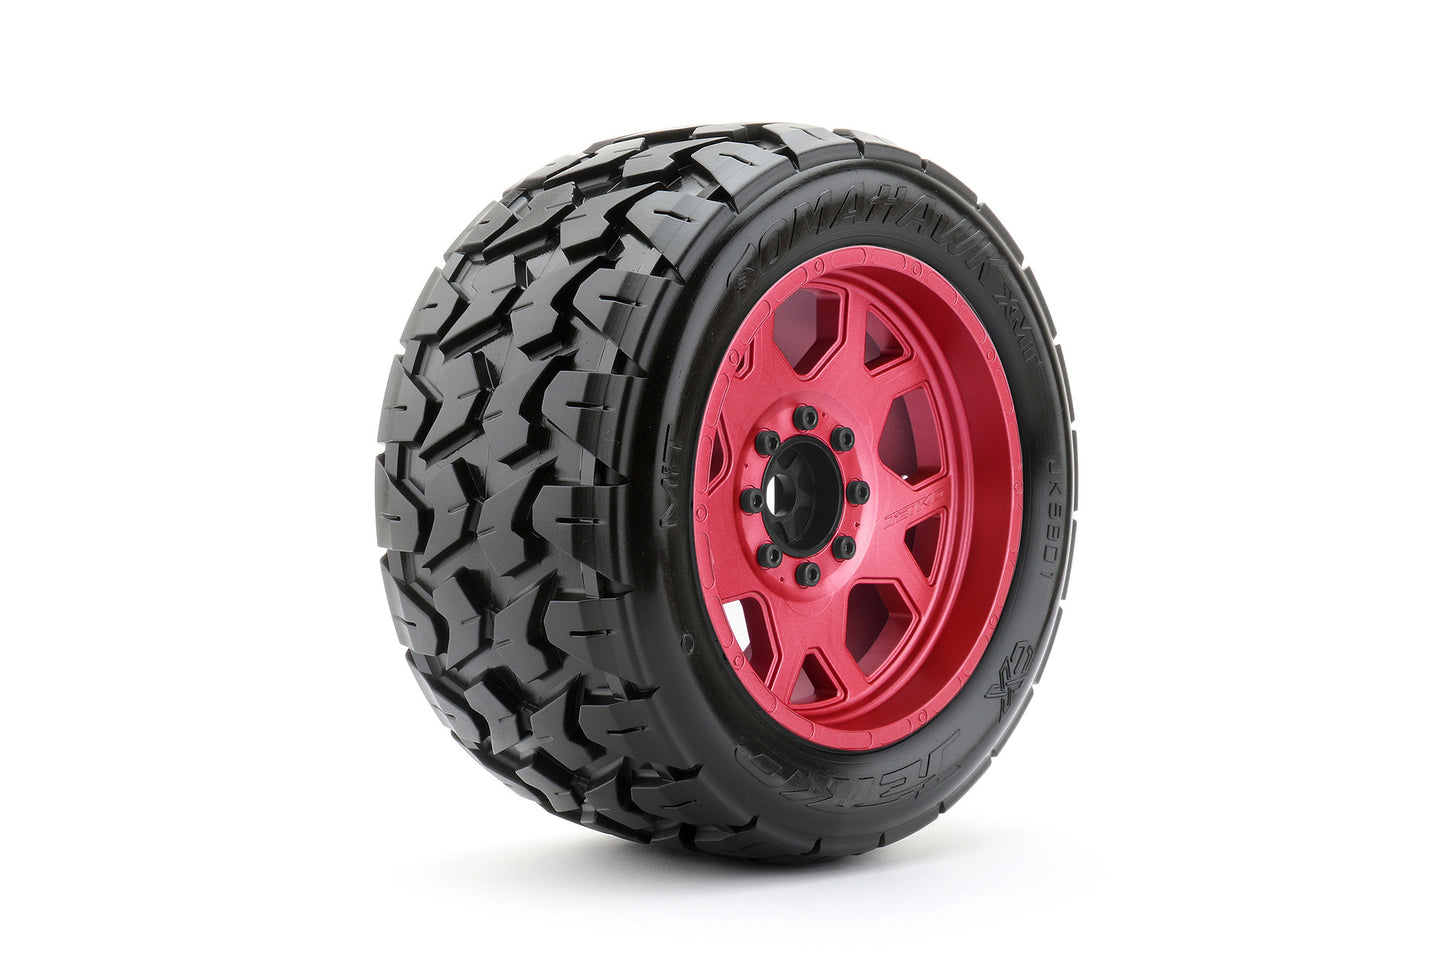 1/5 XMT EX-Tomahawk Tires Mounted on Metal Claw Rims, Medium Soft, Belted, 24mm, for Arrma Kraton